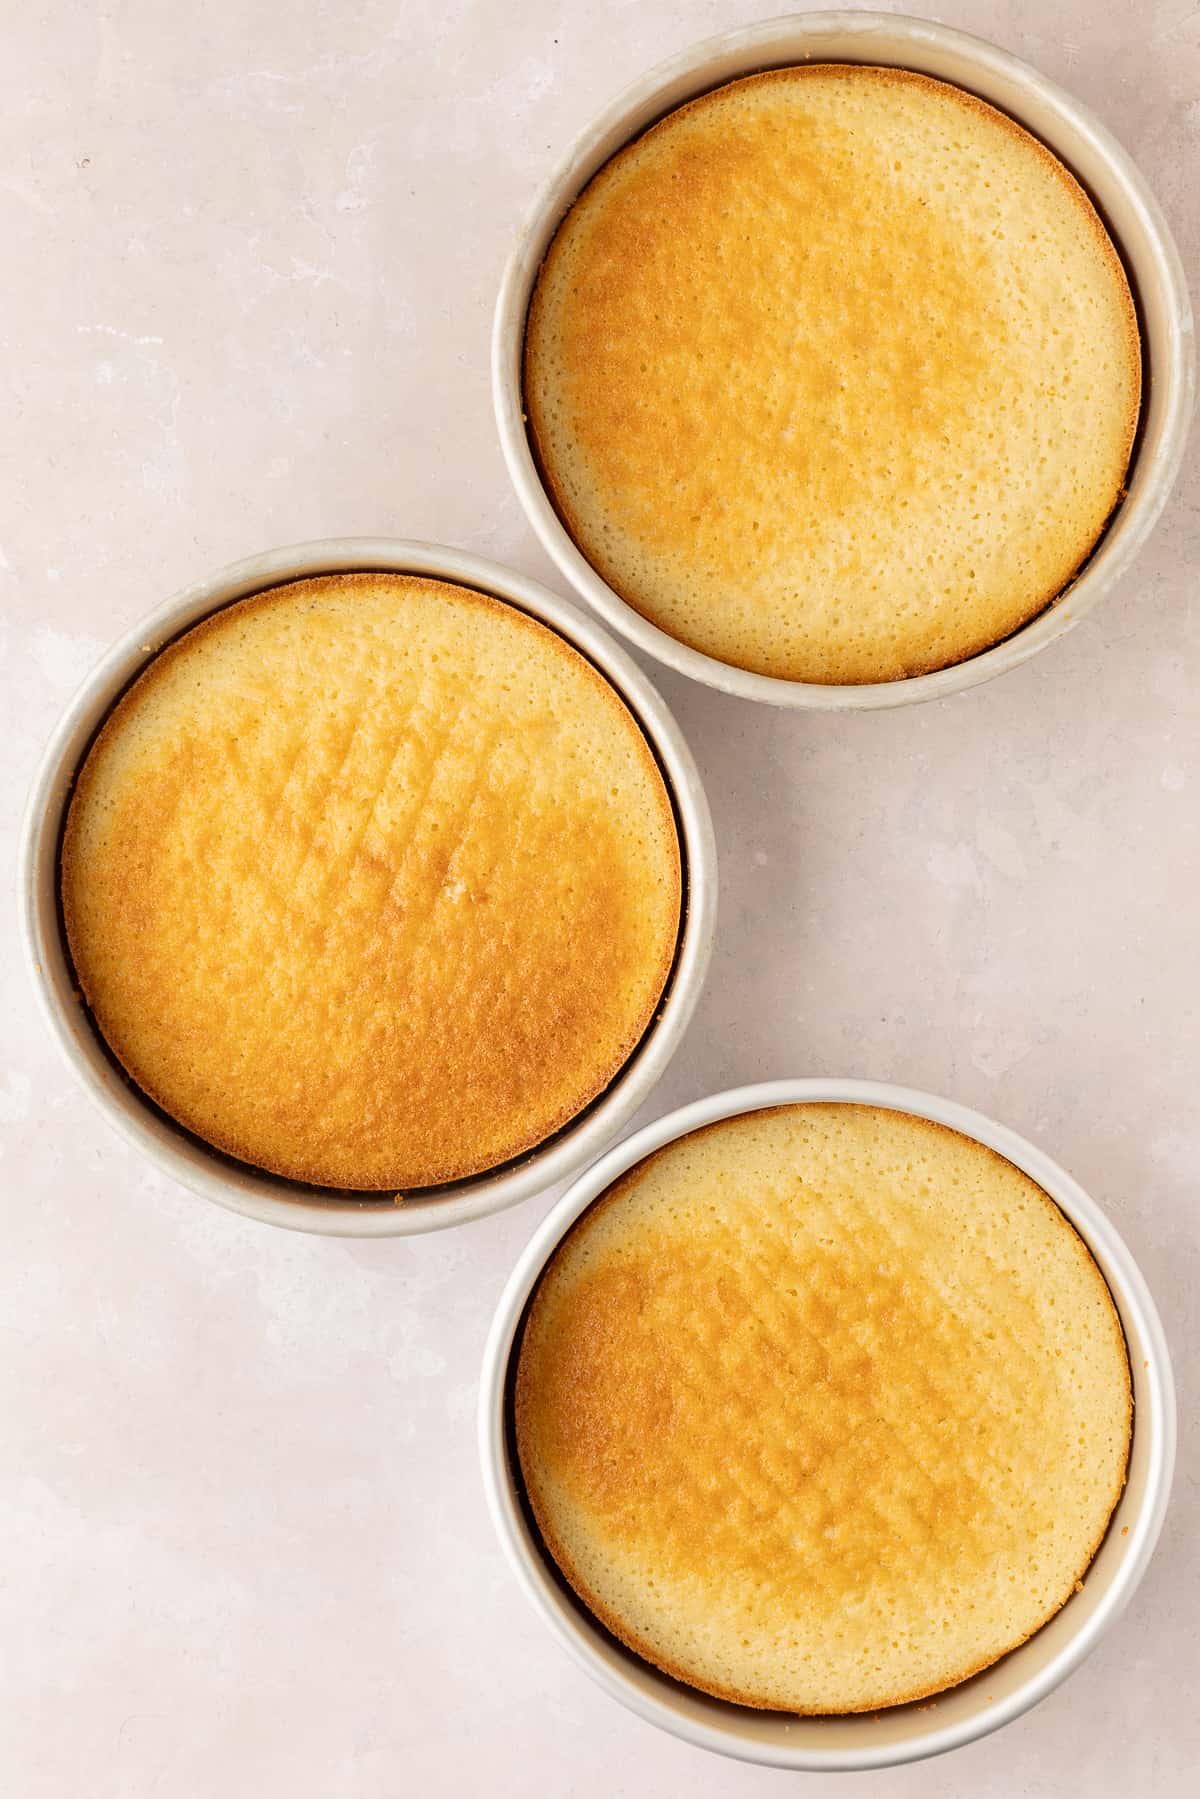 Three baked white cakes in their pans over a light pink surface.